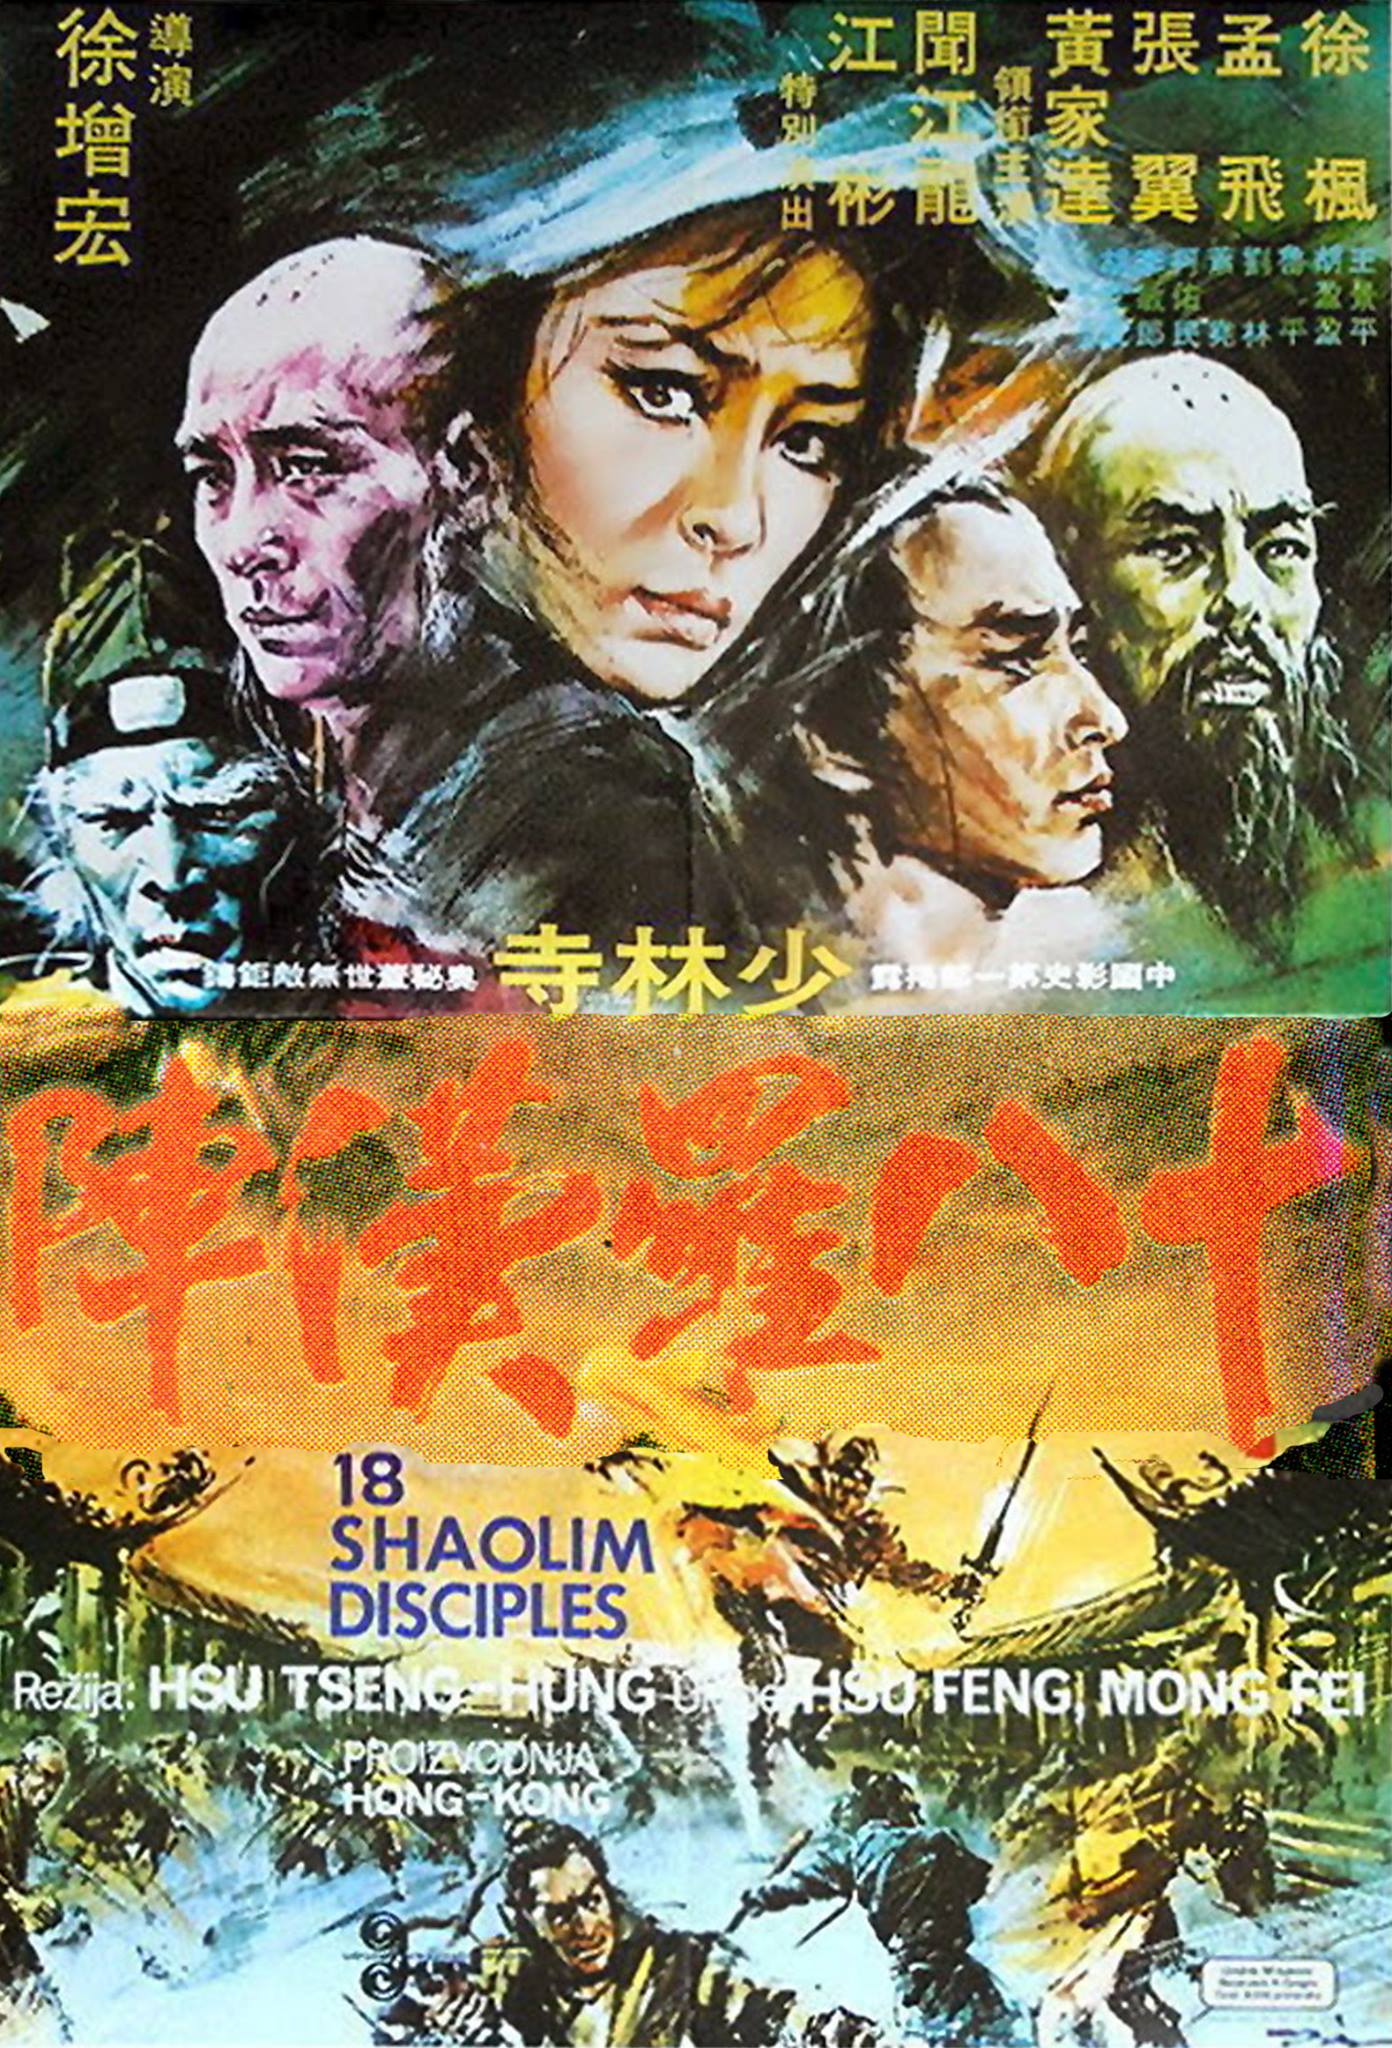 Shi ba luo han zhen (1975) with English Subtitles on DVD on DVD